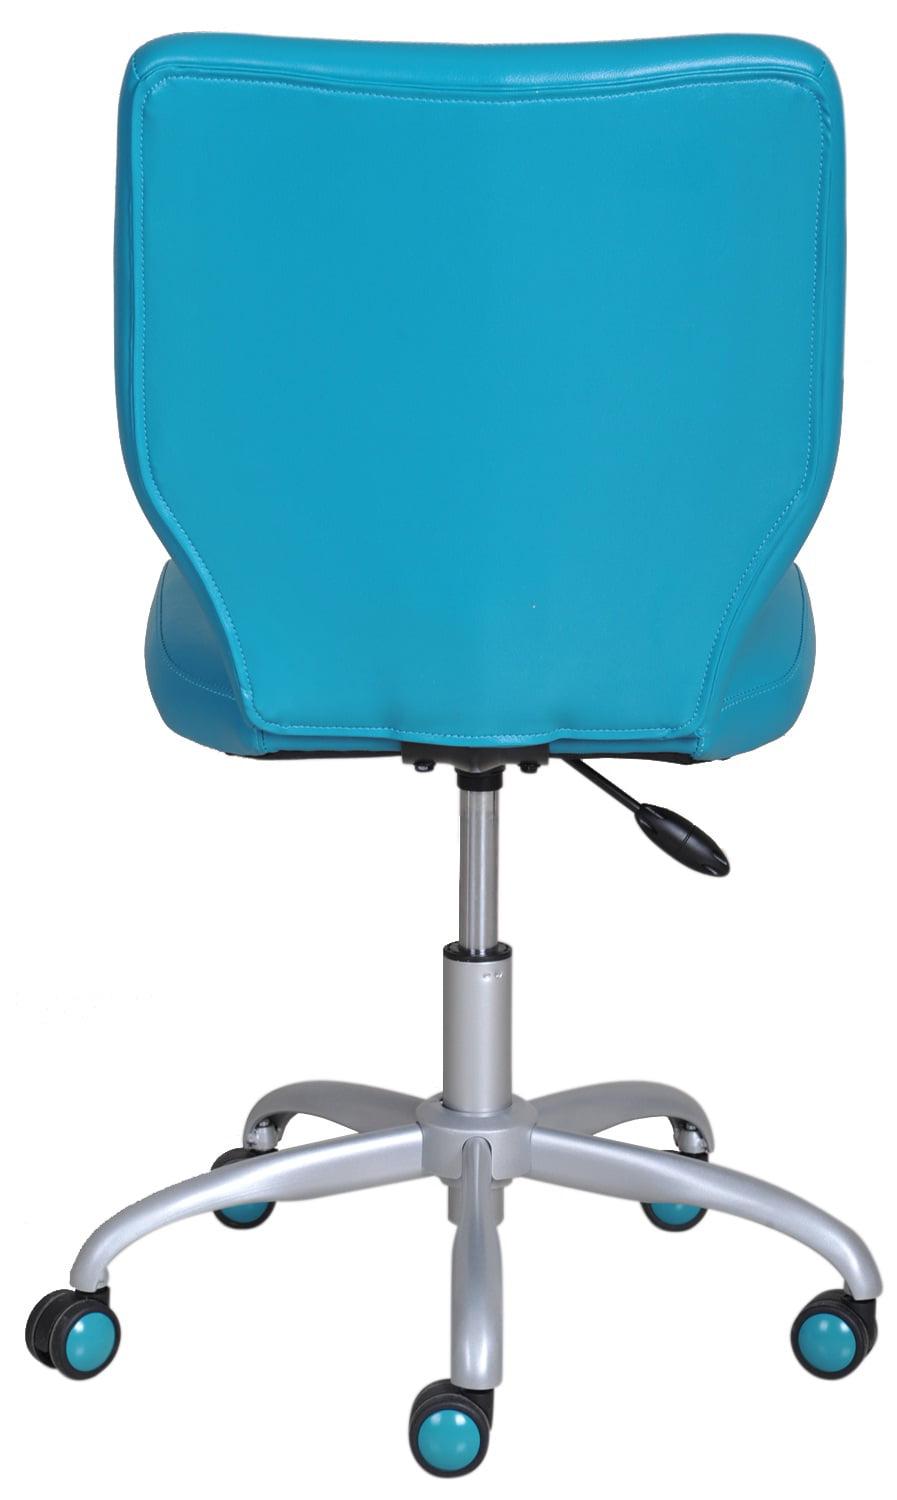 office chair Adjustable Mainstays Teal Student Office Desk ...